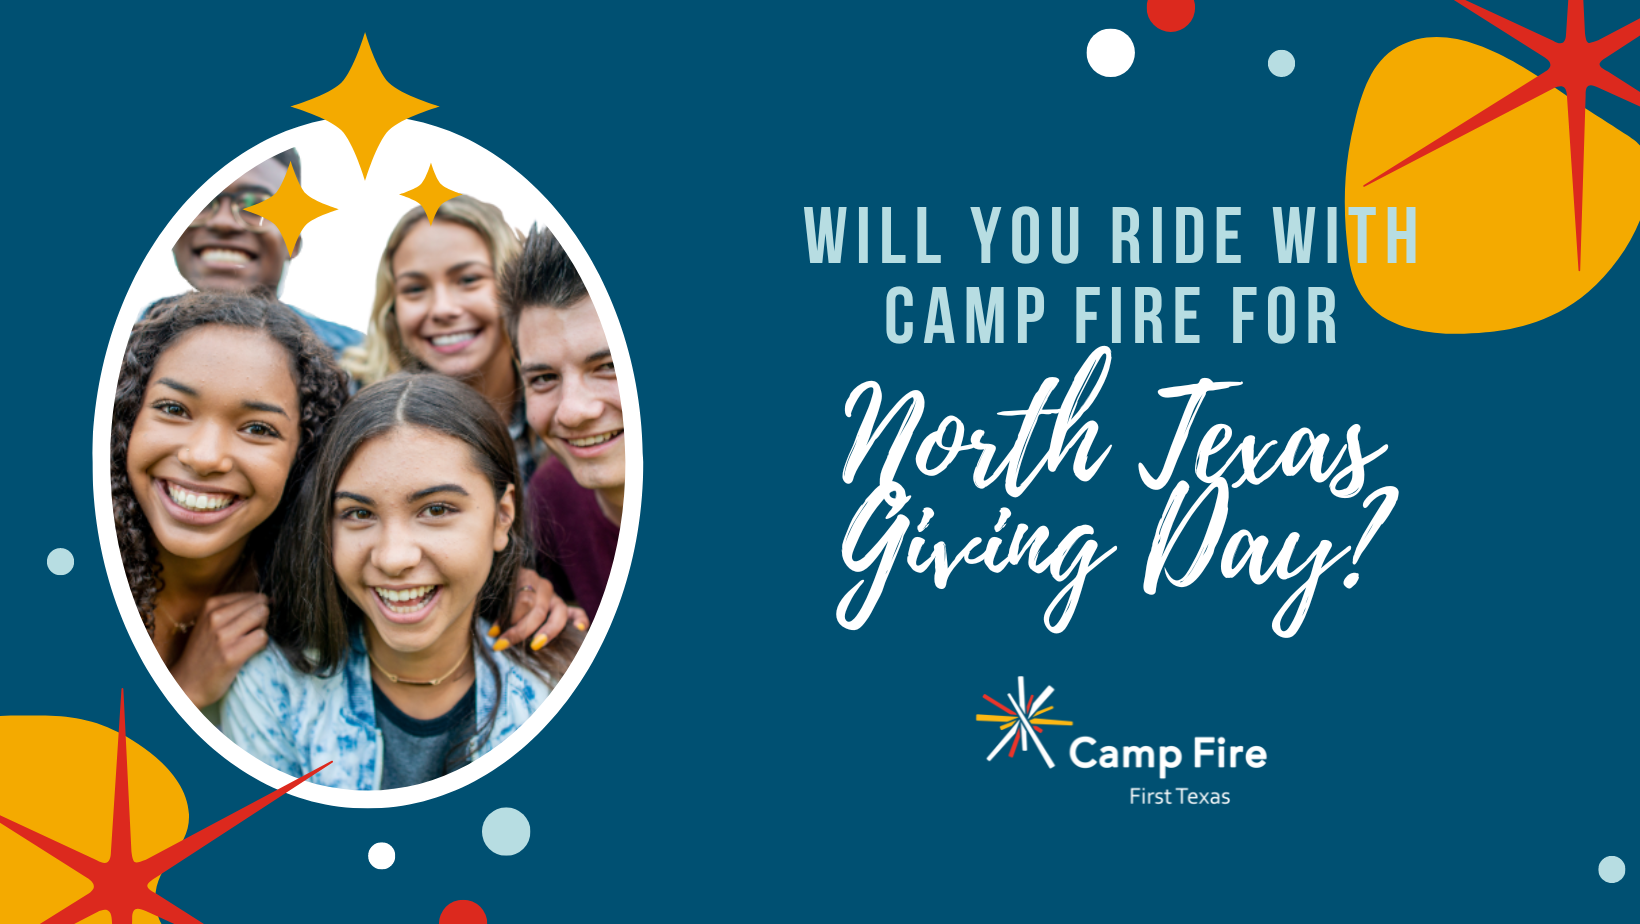 Will you RIDE with Camp Fire on North Texas Giving Day?